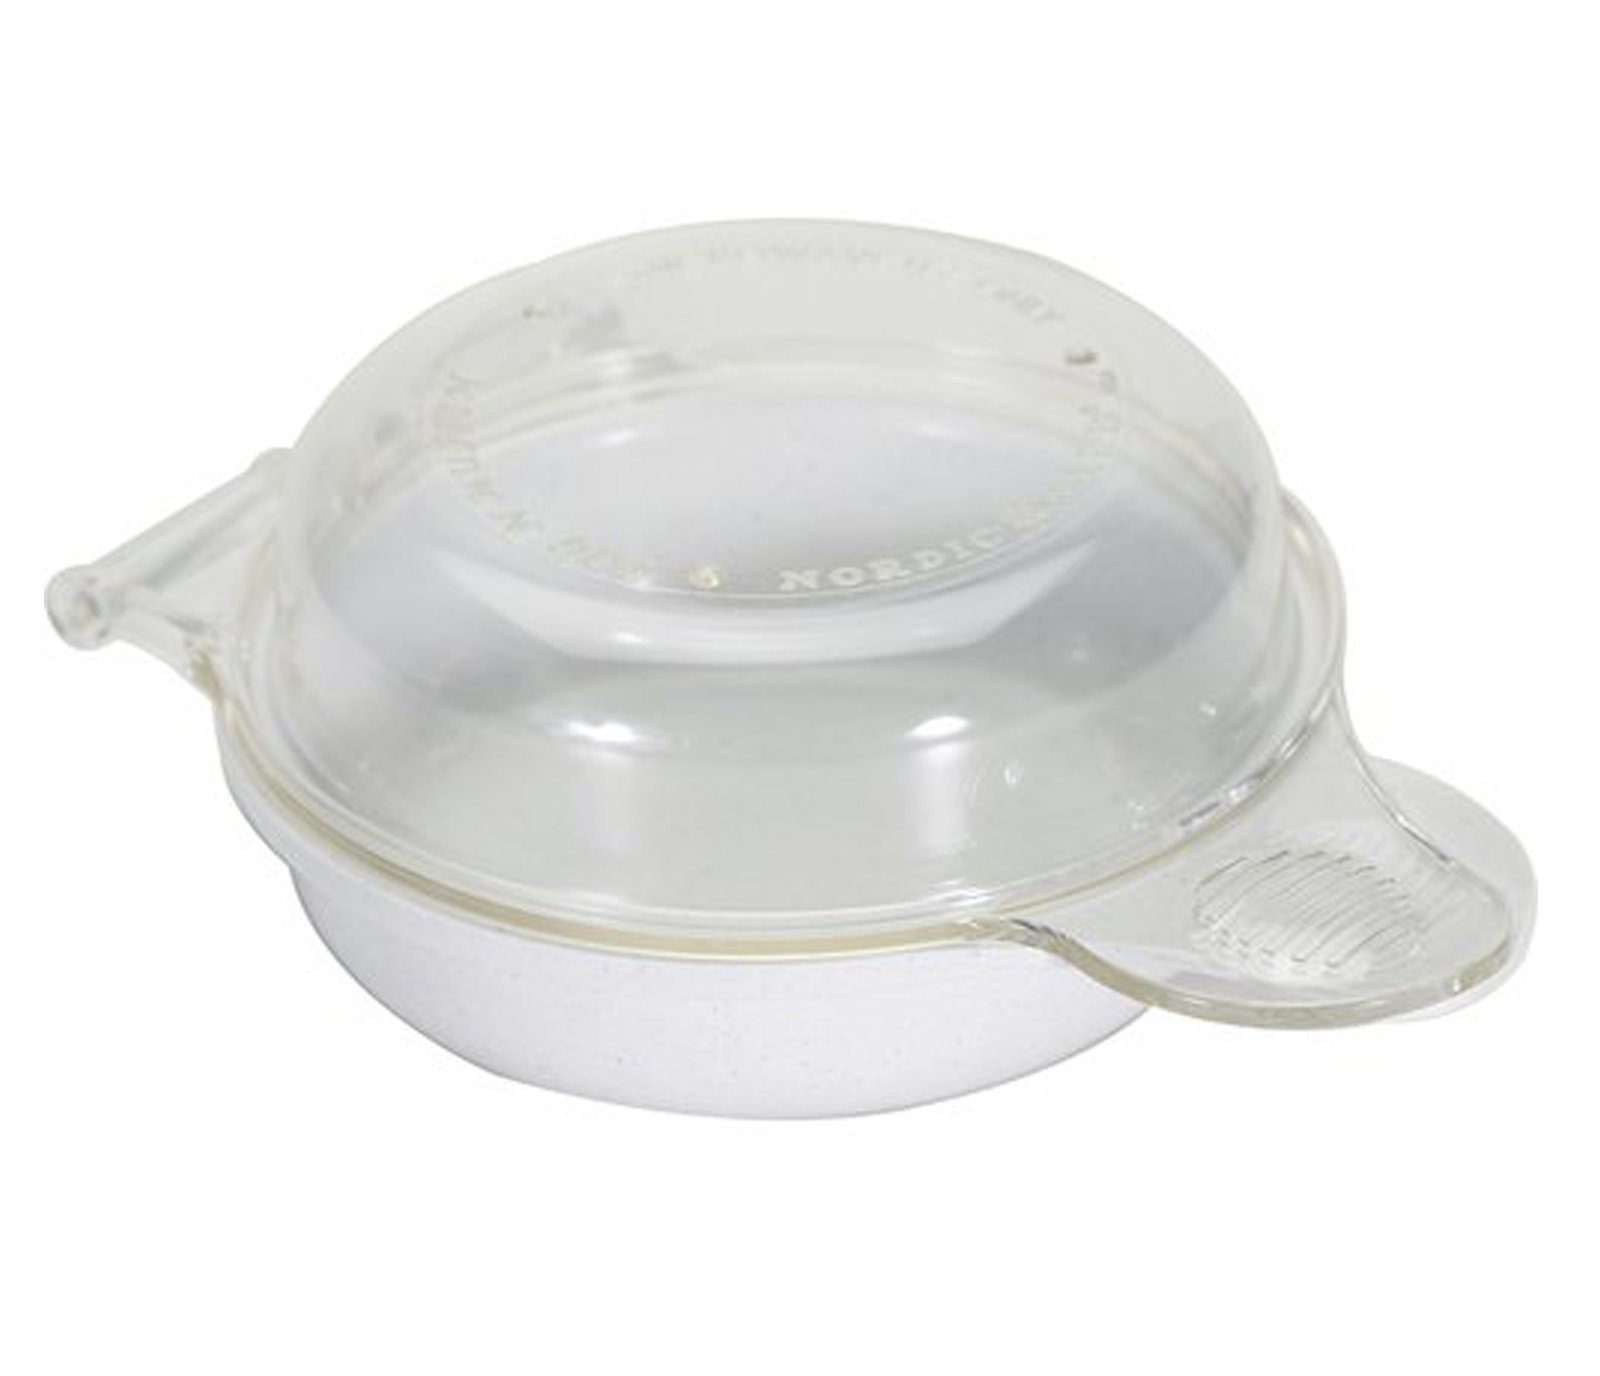  Nordic Ware Kitchen & Dining Microwave Egg Boiler, 4 Capacity,  White: Egg Cookers: Home & Kitchen